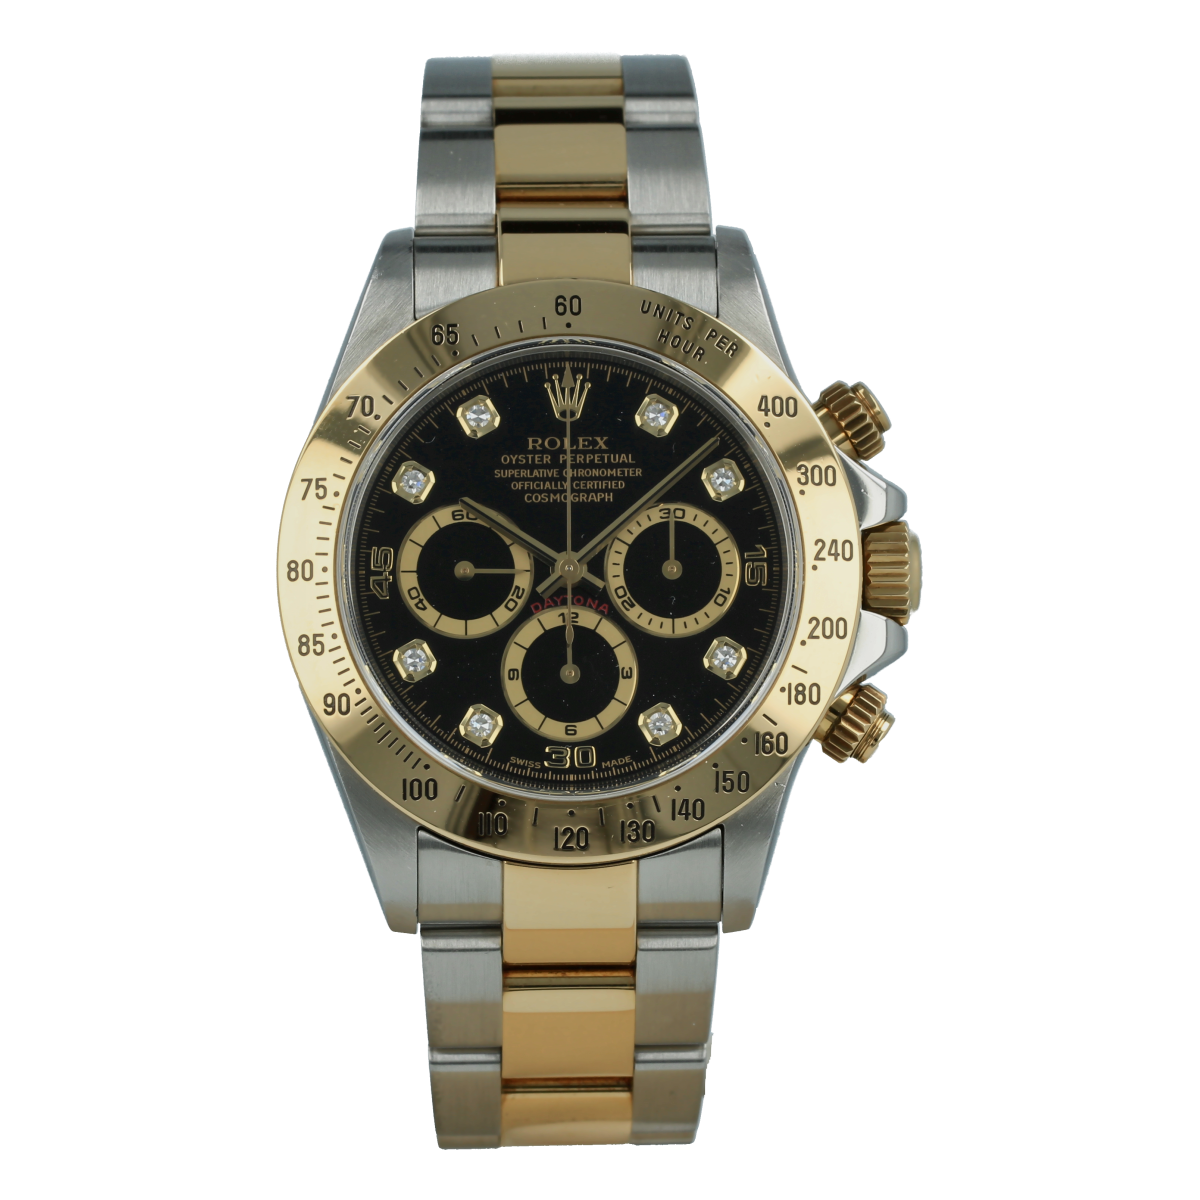 Rolex Cosmograph Daytona 16523 Steel and Yellow Gold Slate Dial 